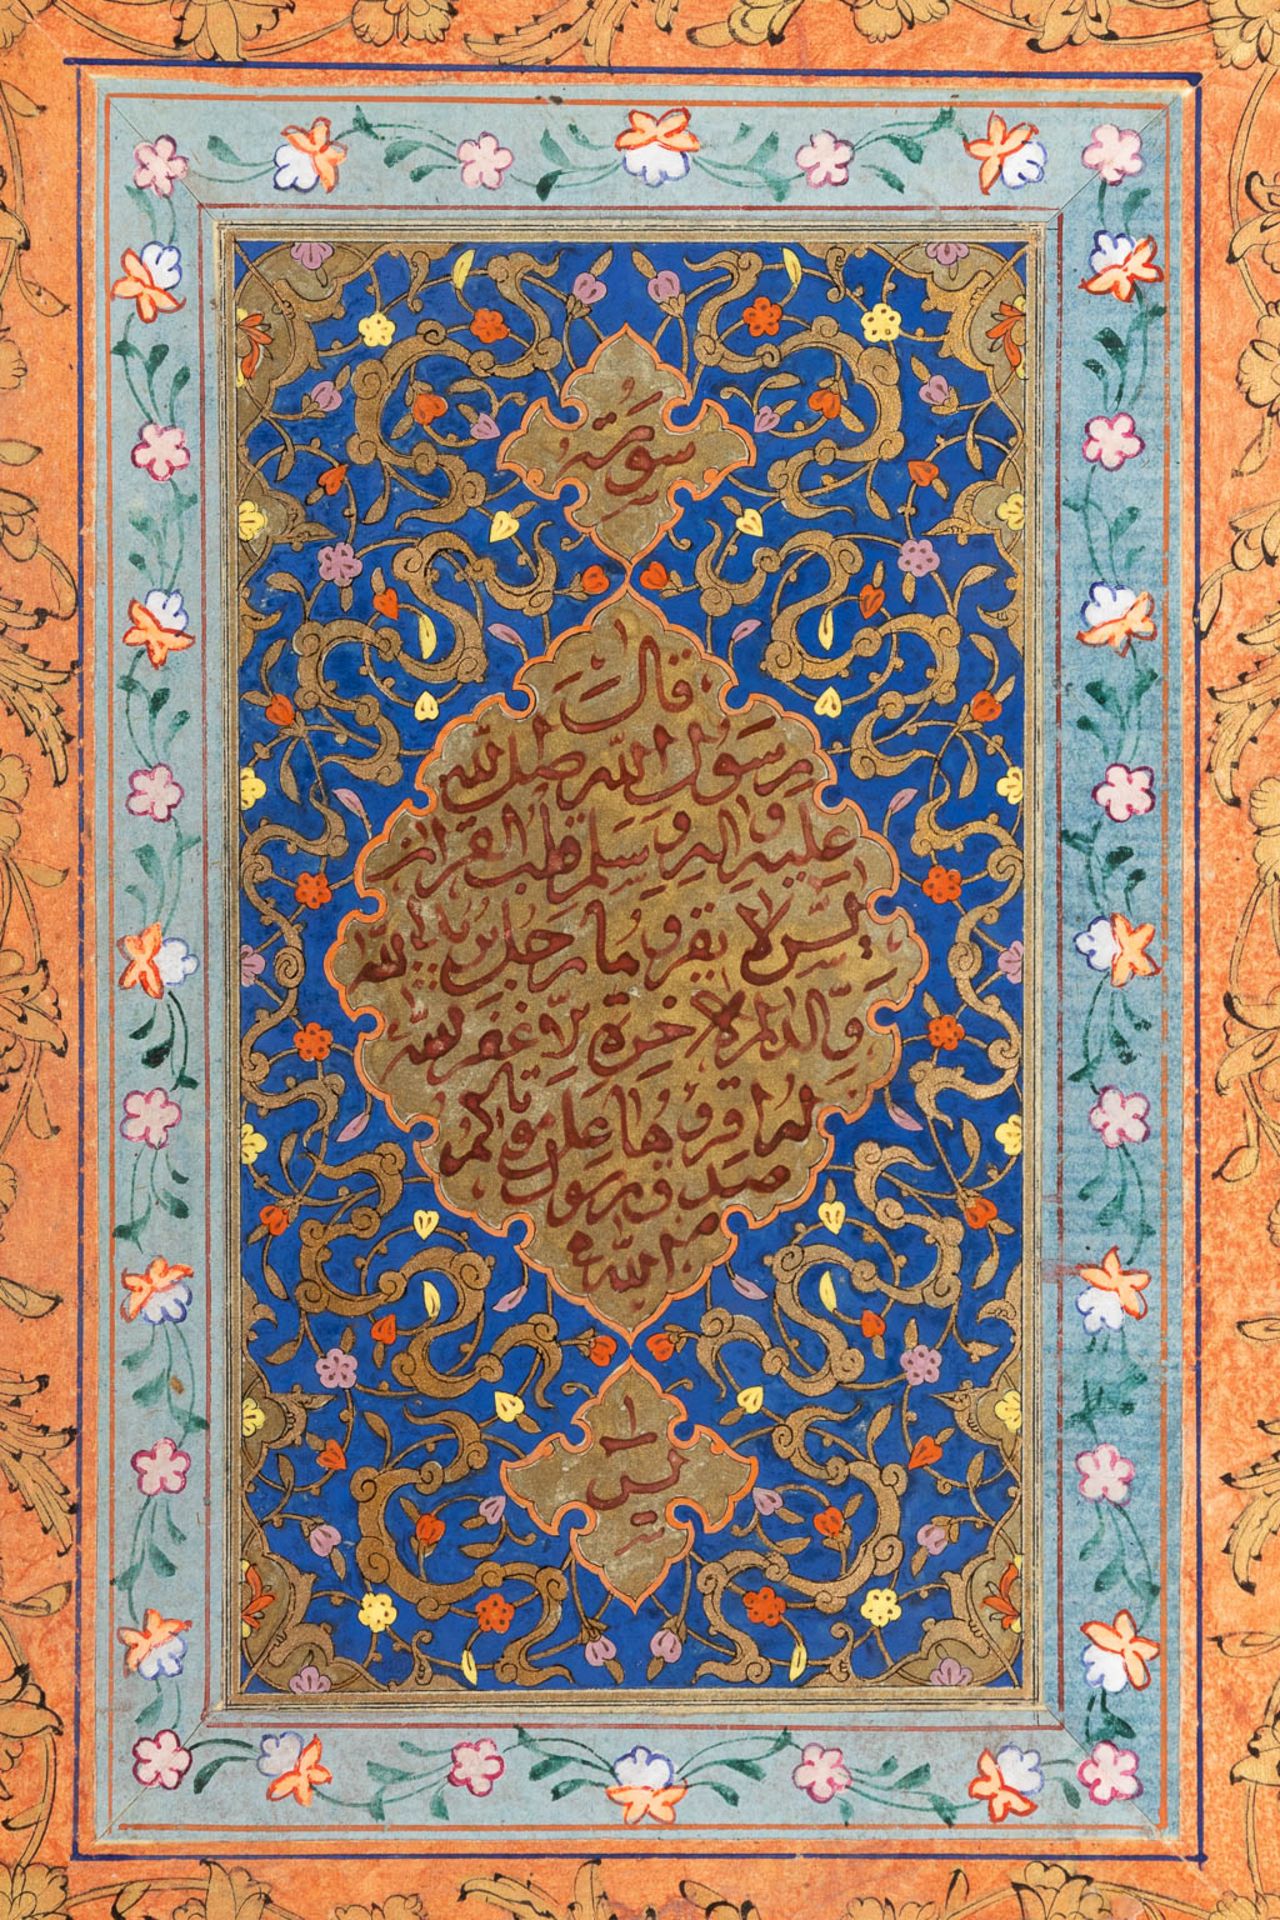 An album of Ottoman Calligraphic Panels (QITA) early 20th C. (W:15 x H:20 cm) - Image 9 of 12